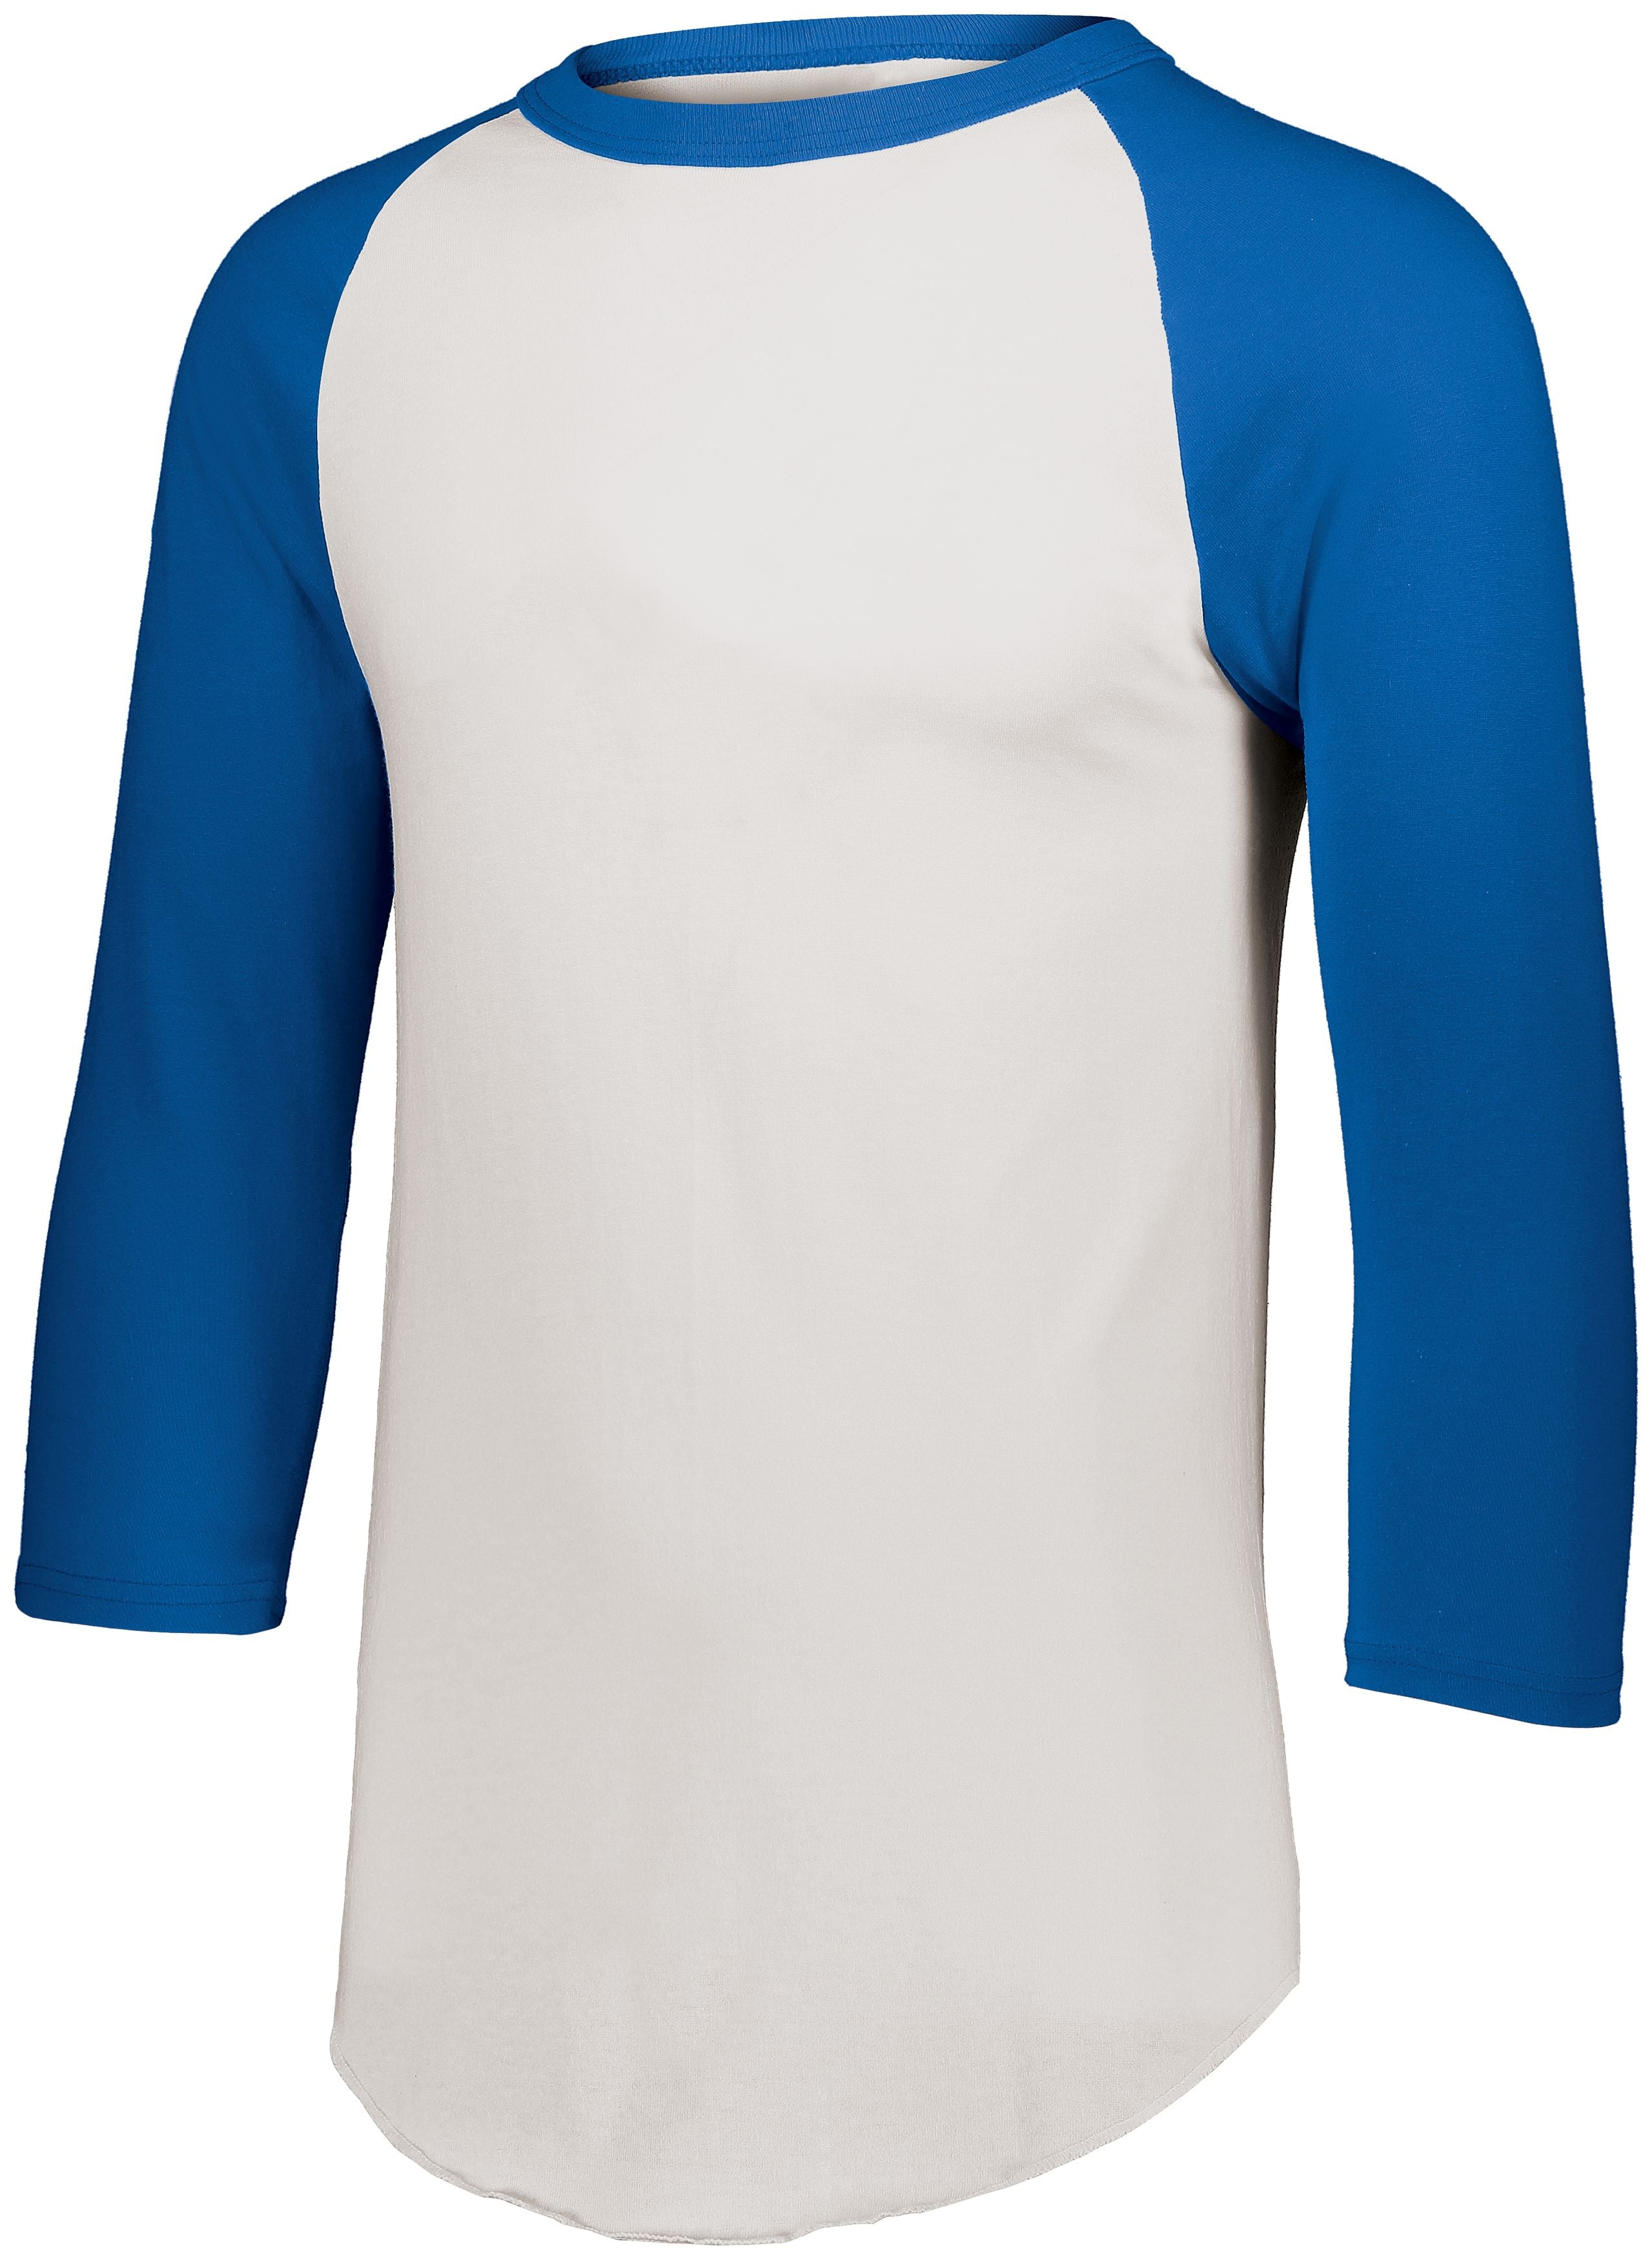 Augusta Sportswear Youth Baseball Jersey 2.0 in White/Royal  -Part of the Youth, Youth-Jersey, Augusta-Products, Baseball, Shirts, All-Sports, All-Sports-1 product lines at KanaleyCreations.com